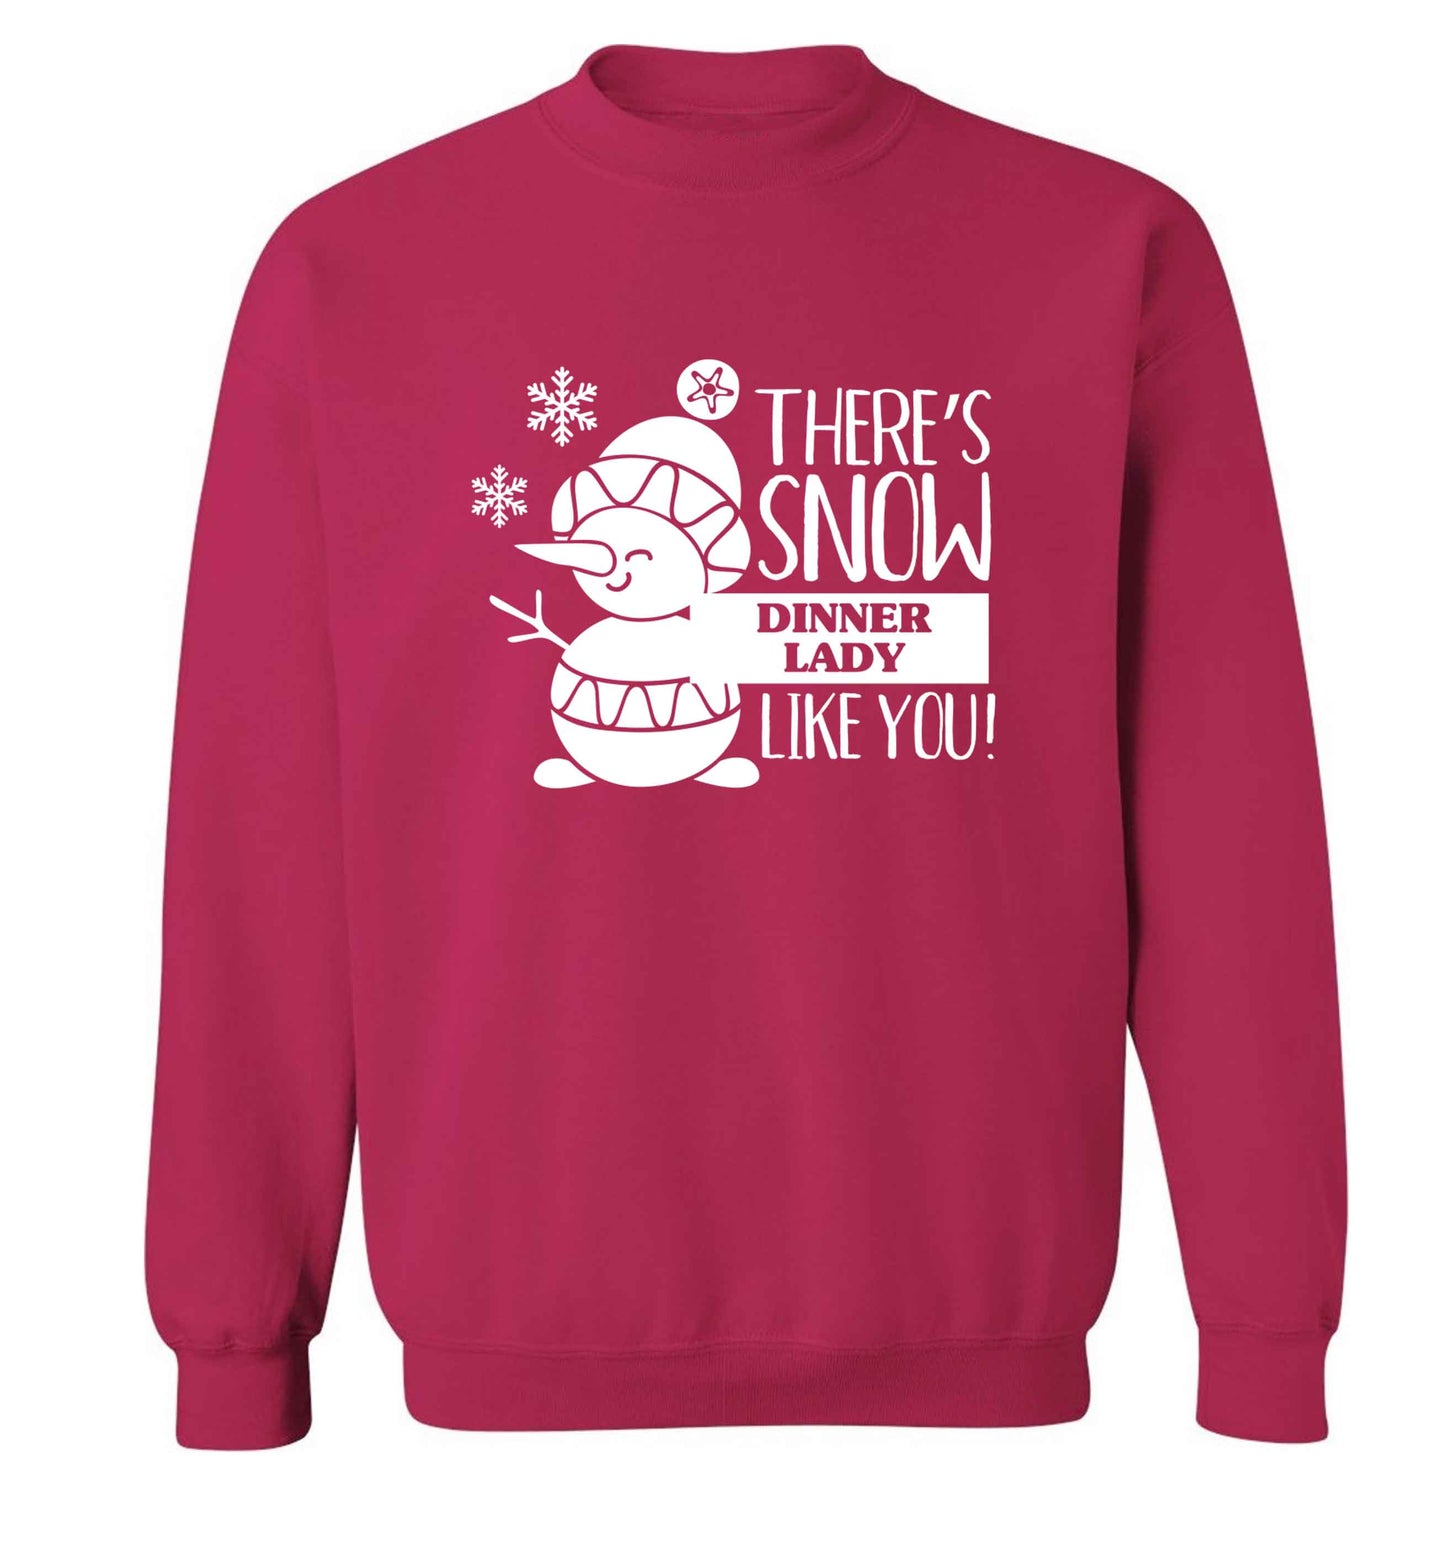 There's snow dinner lady like you adult's unisex pink sweater 2XL